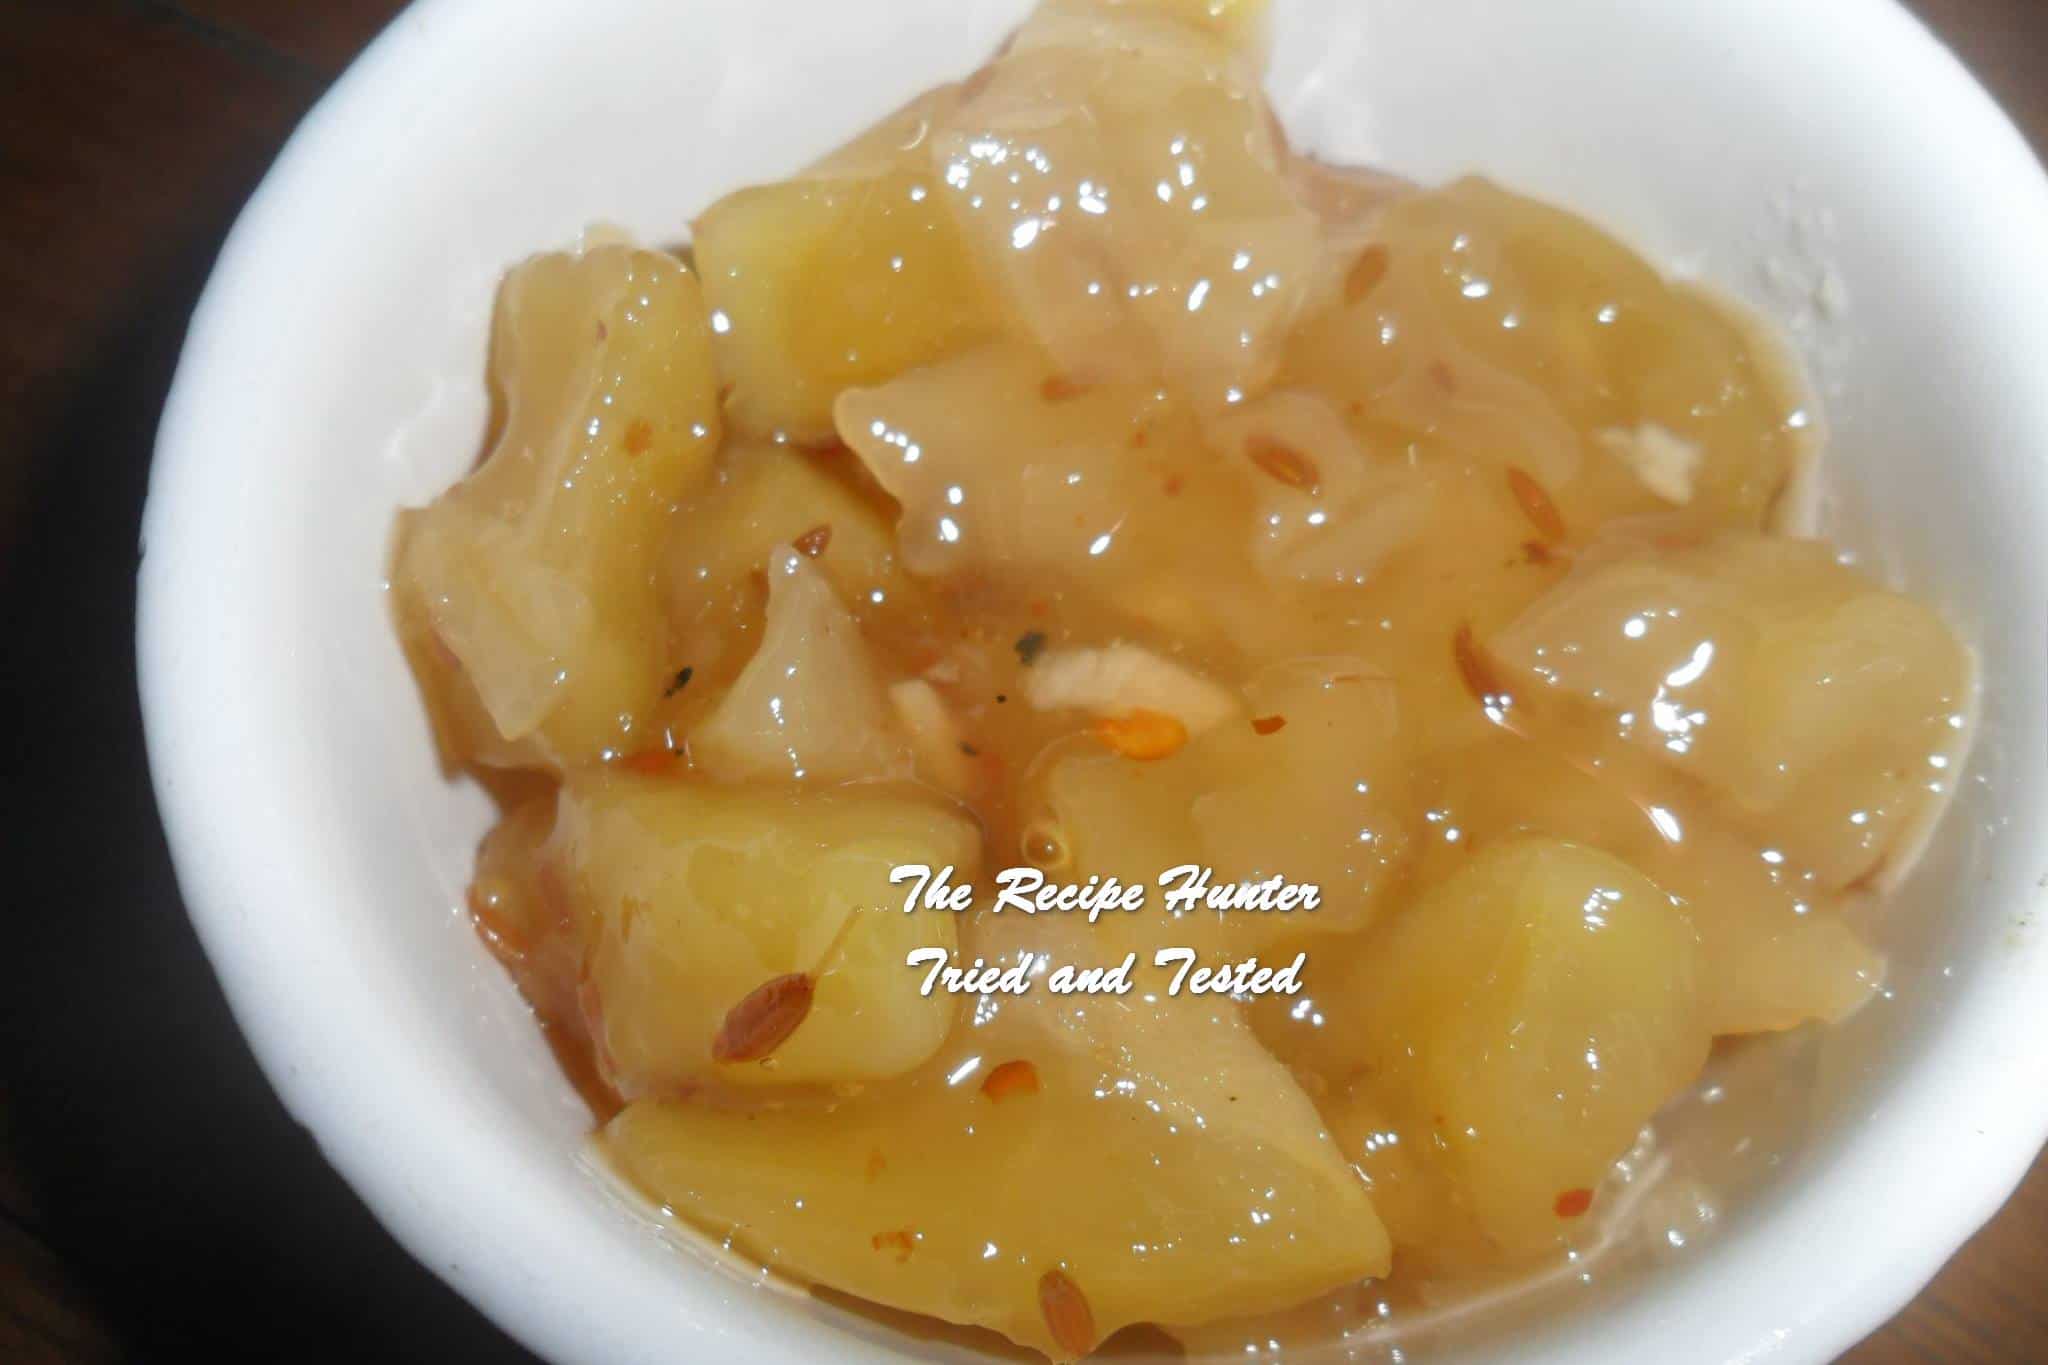 Homemade Mango Chutney in a white dish made with Green under-ripe Mangoes